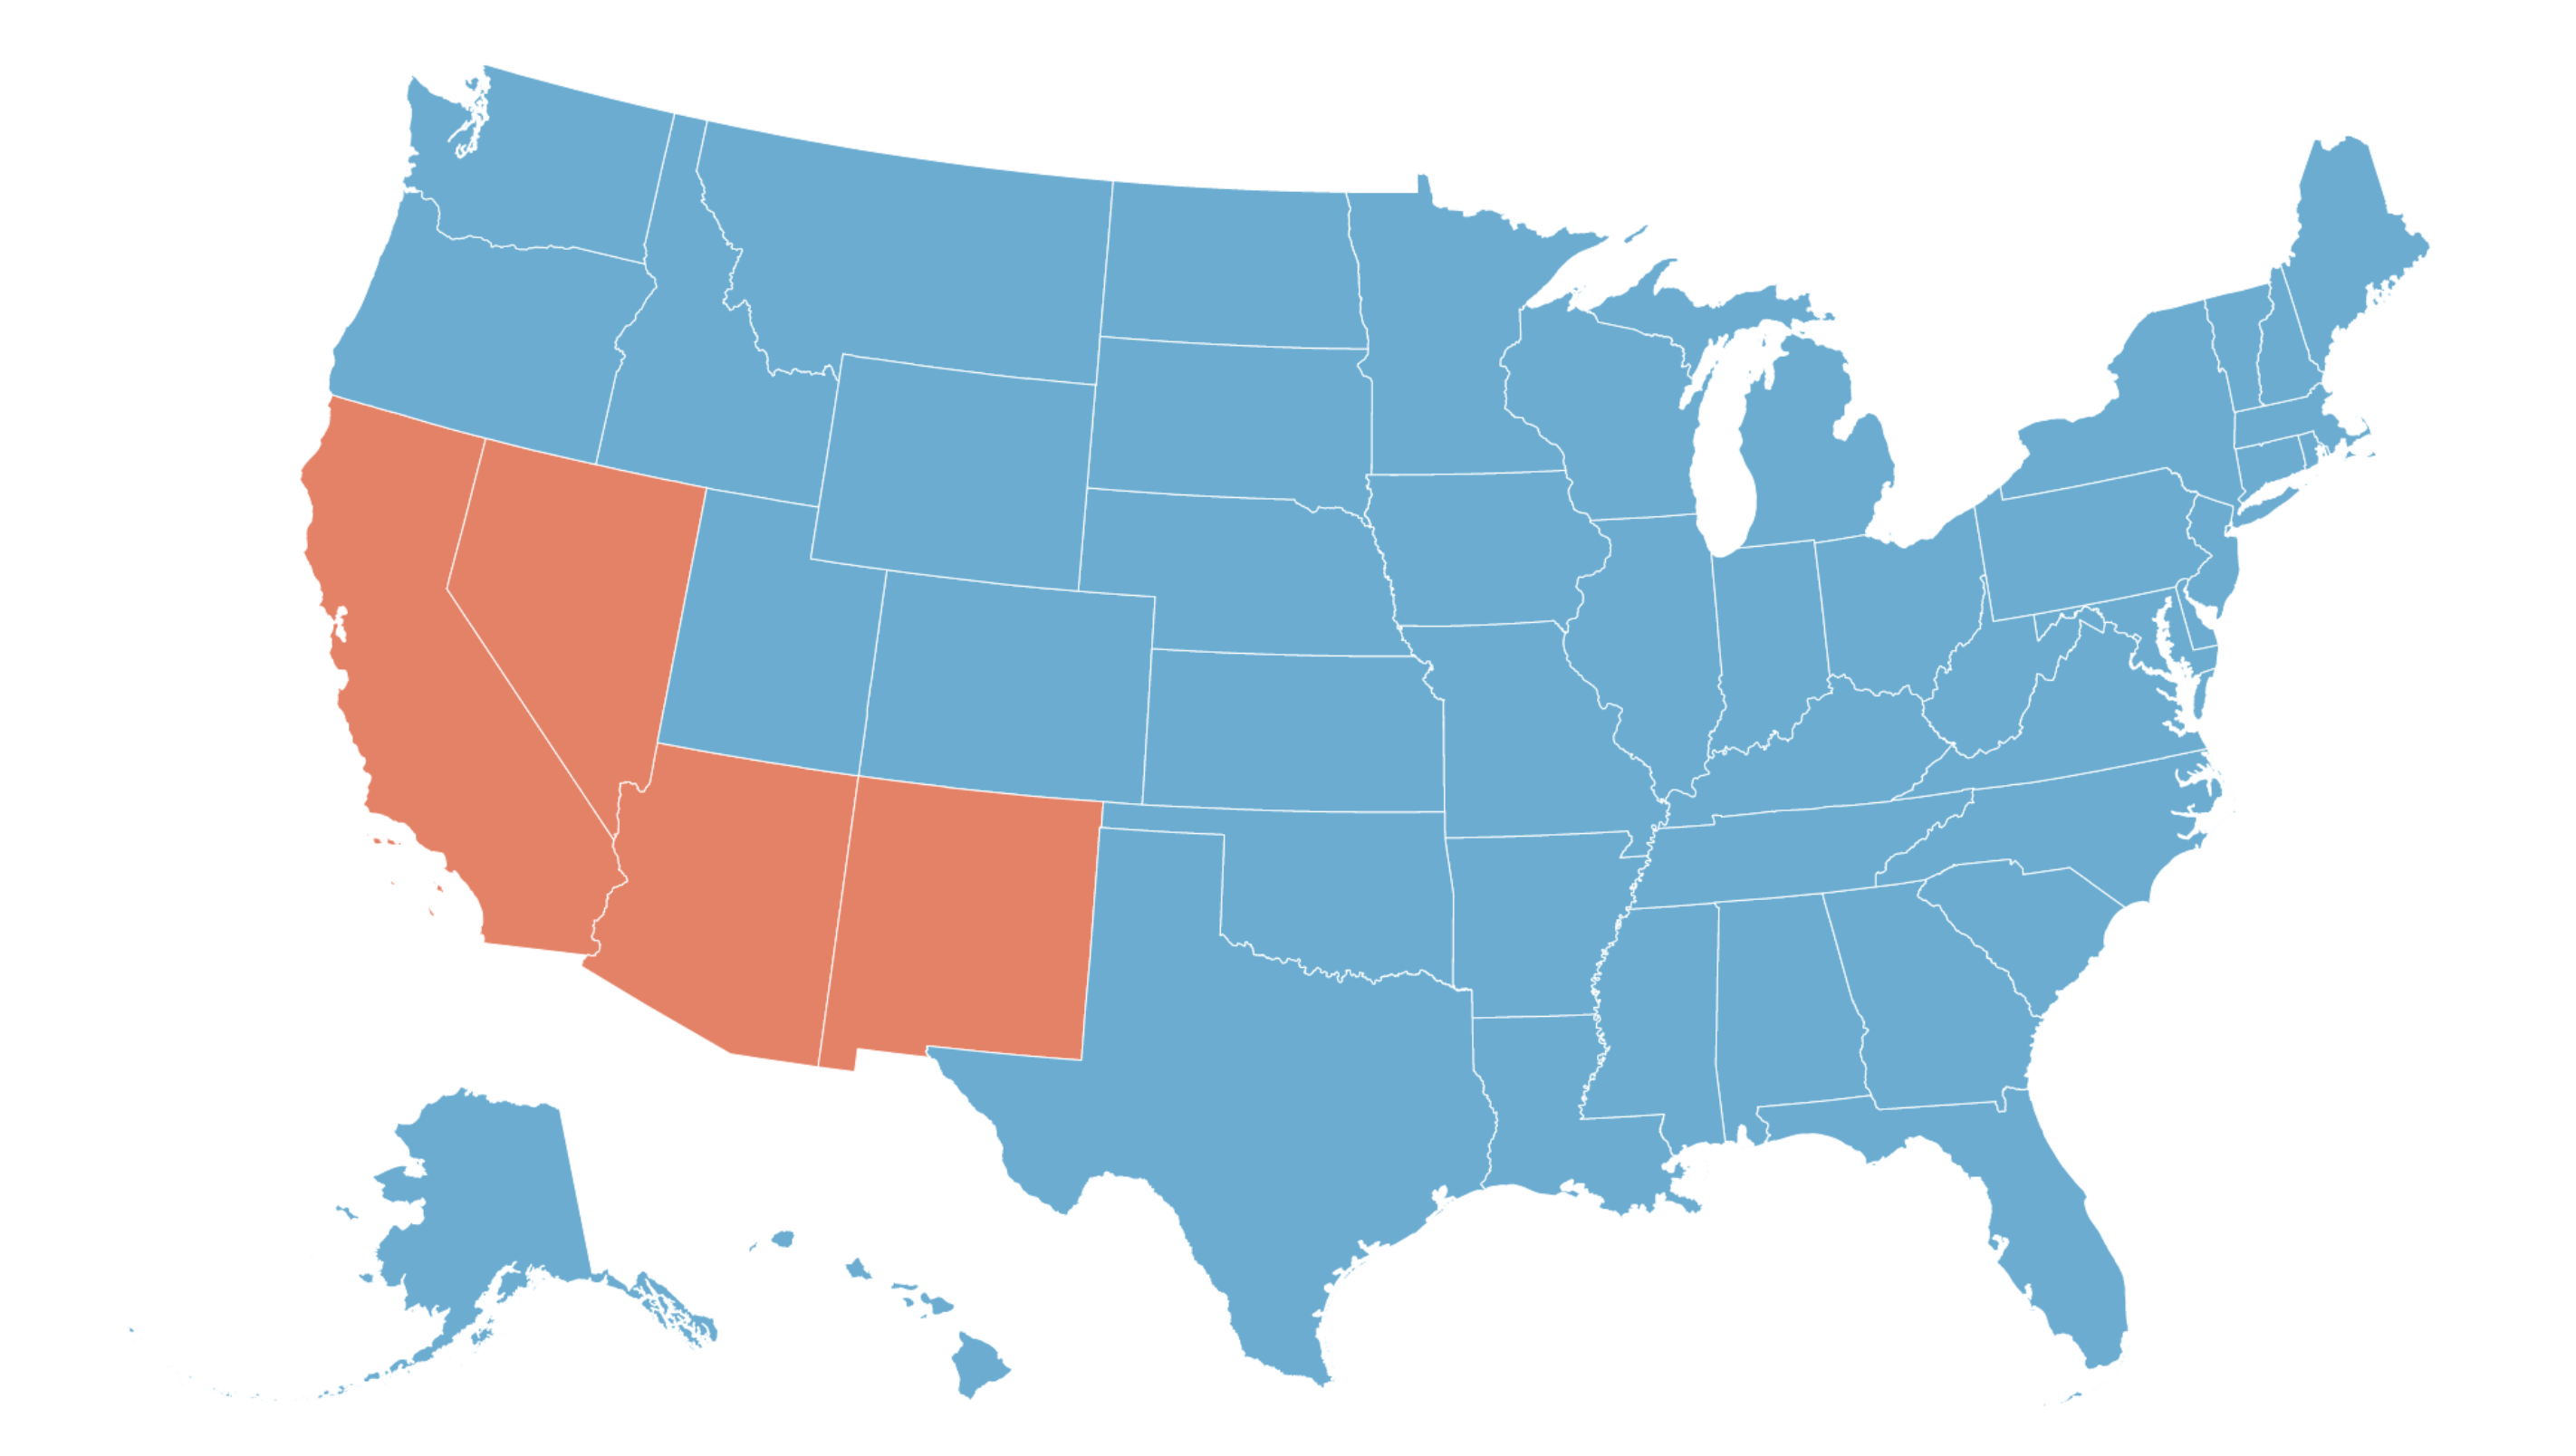 Map of the US showing US states in red or blue showing most states in blue